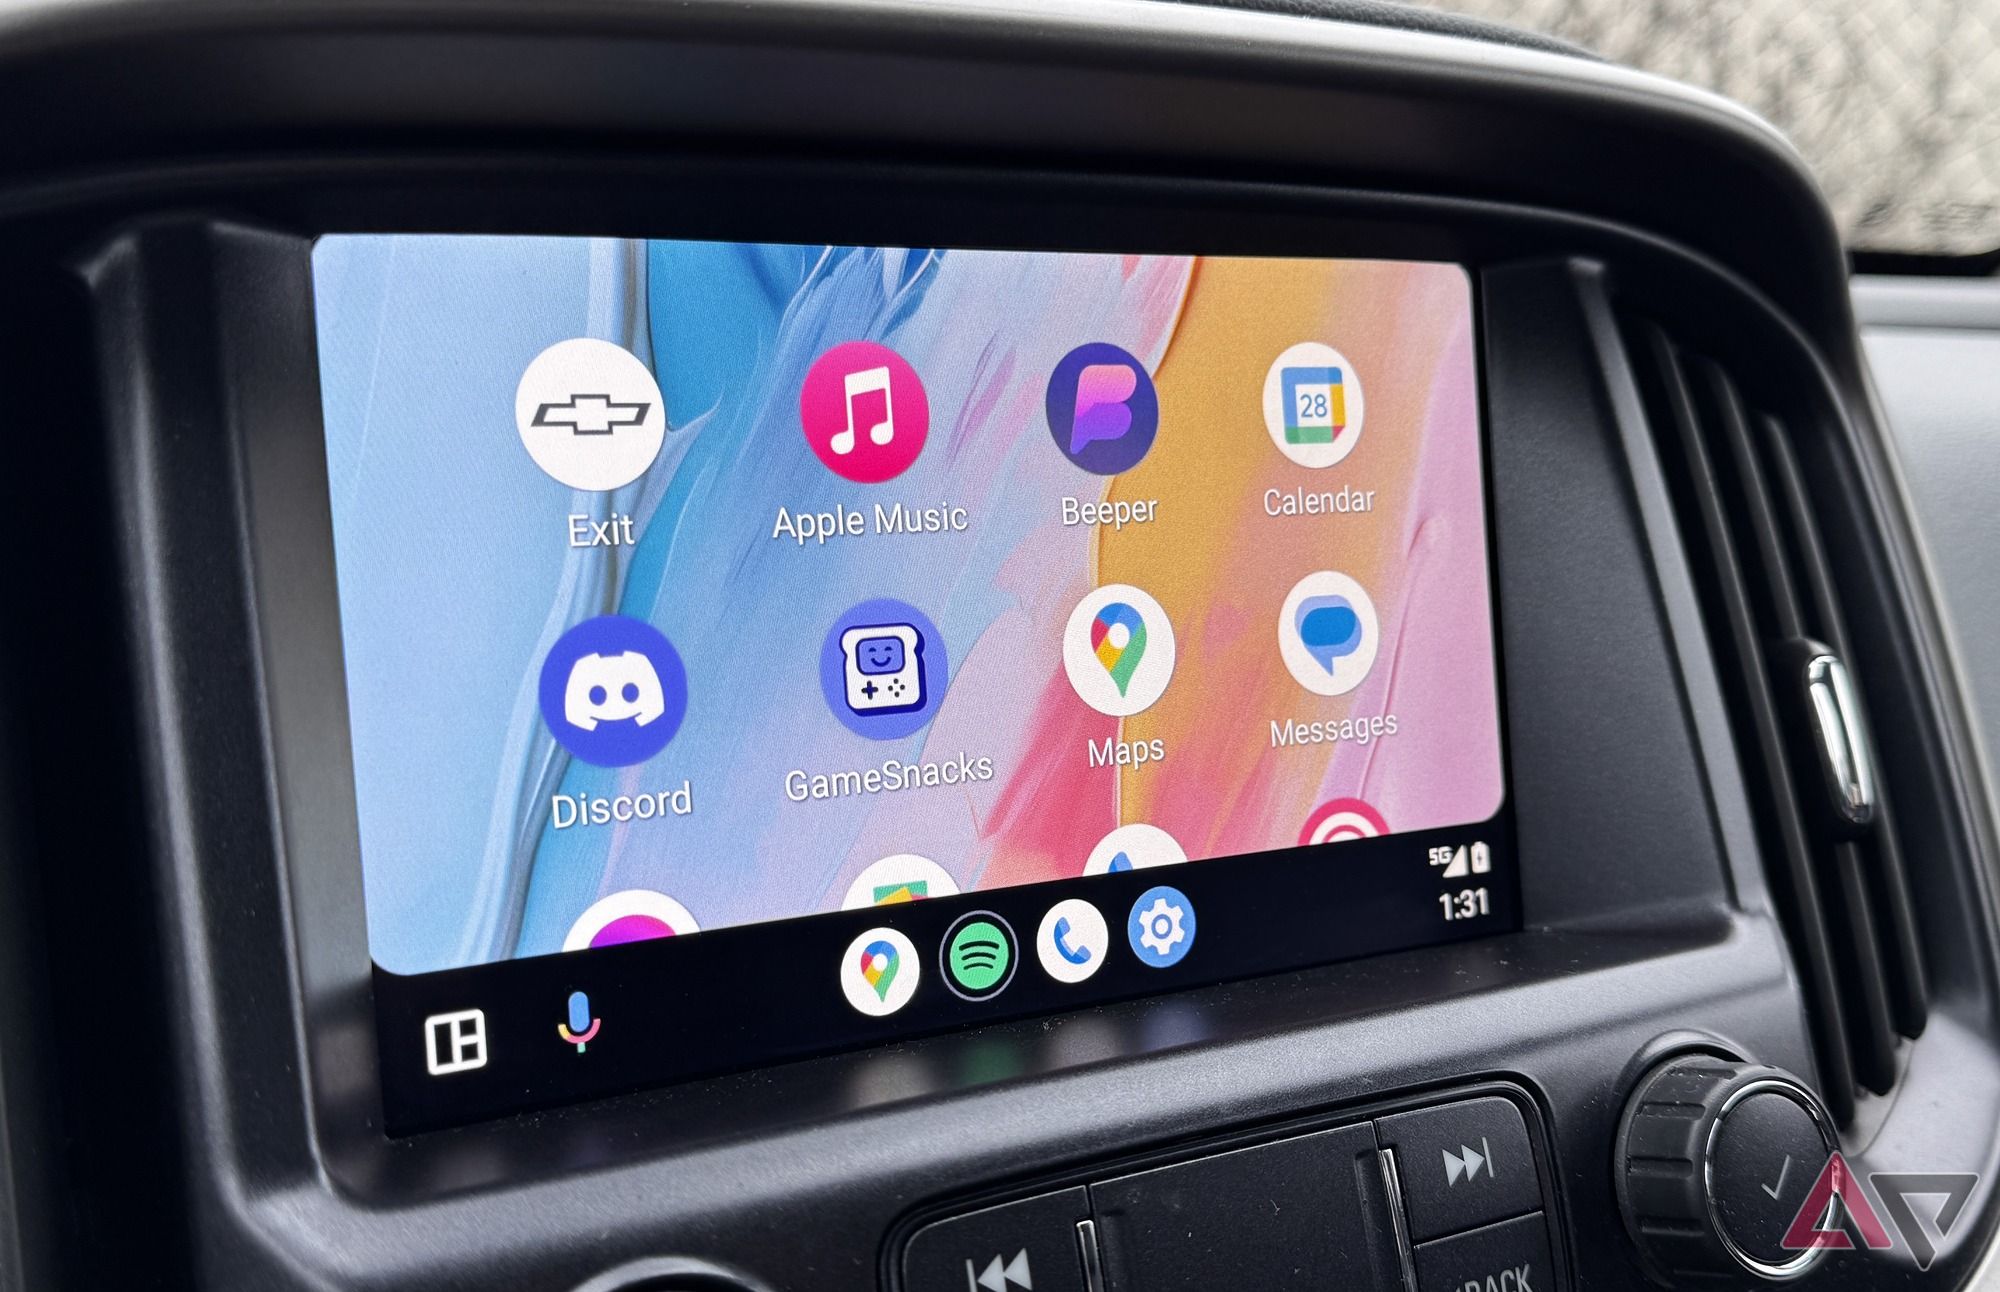 Android Auto update brings new Google Assistant design - SamMobile